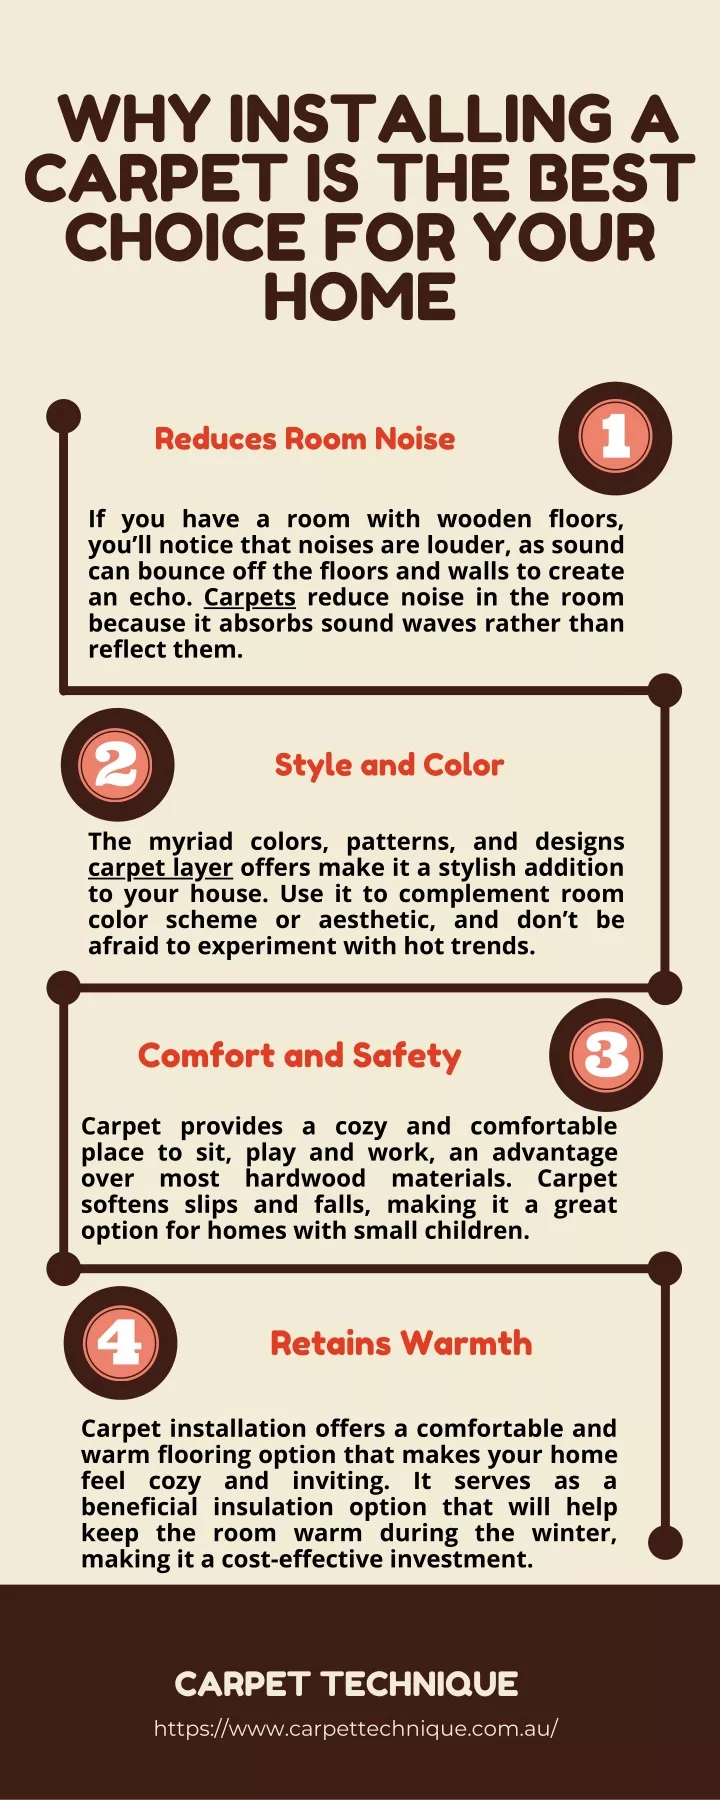 why installing a carpet is the best choice